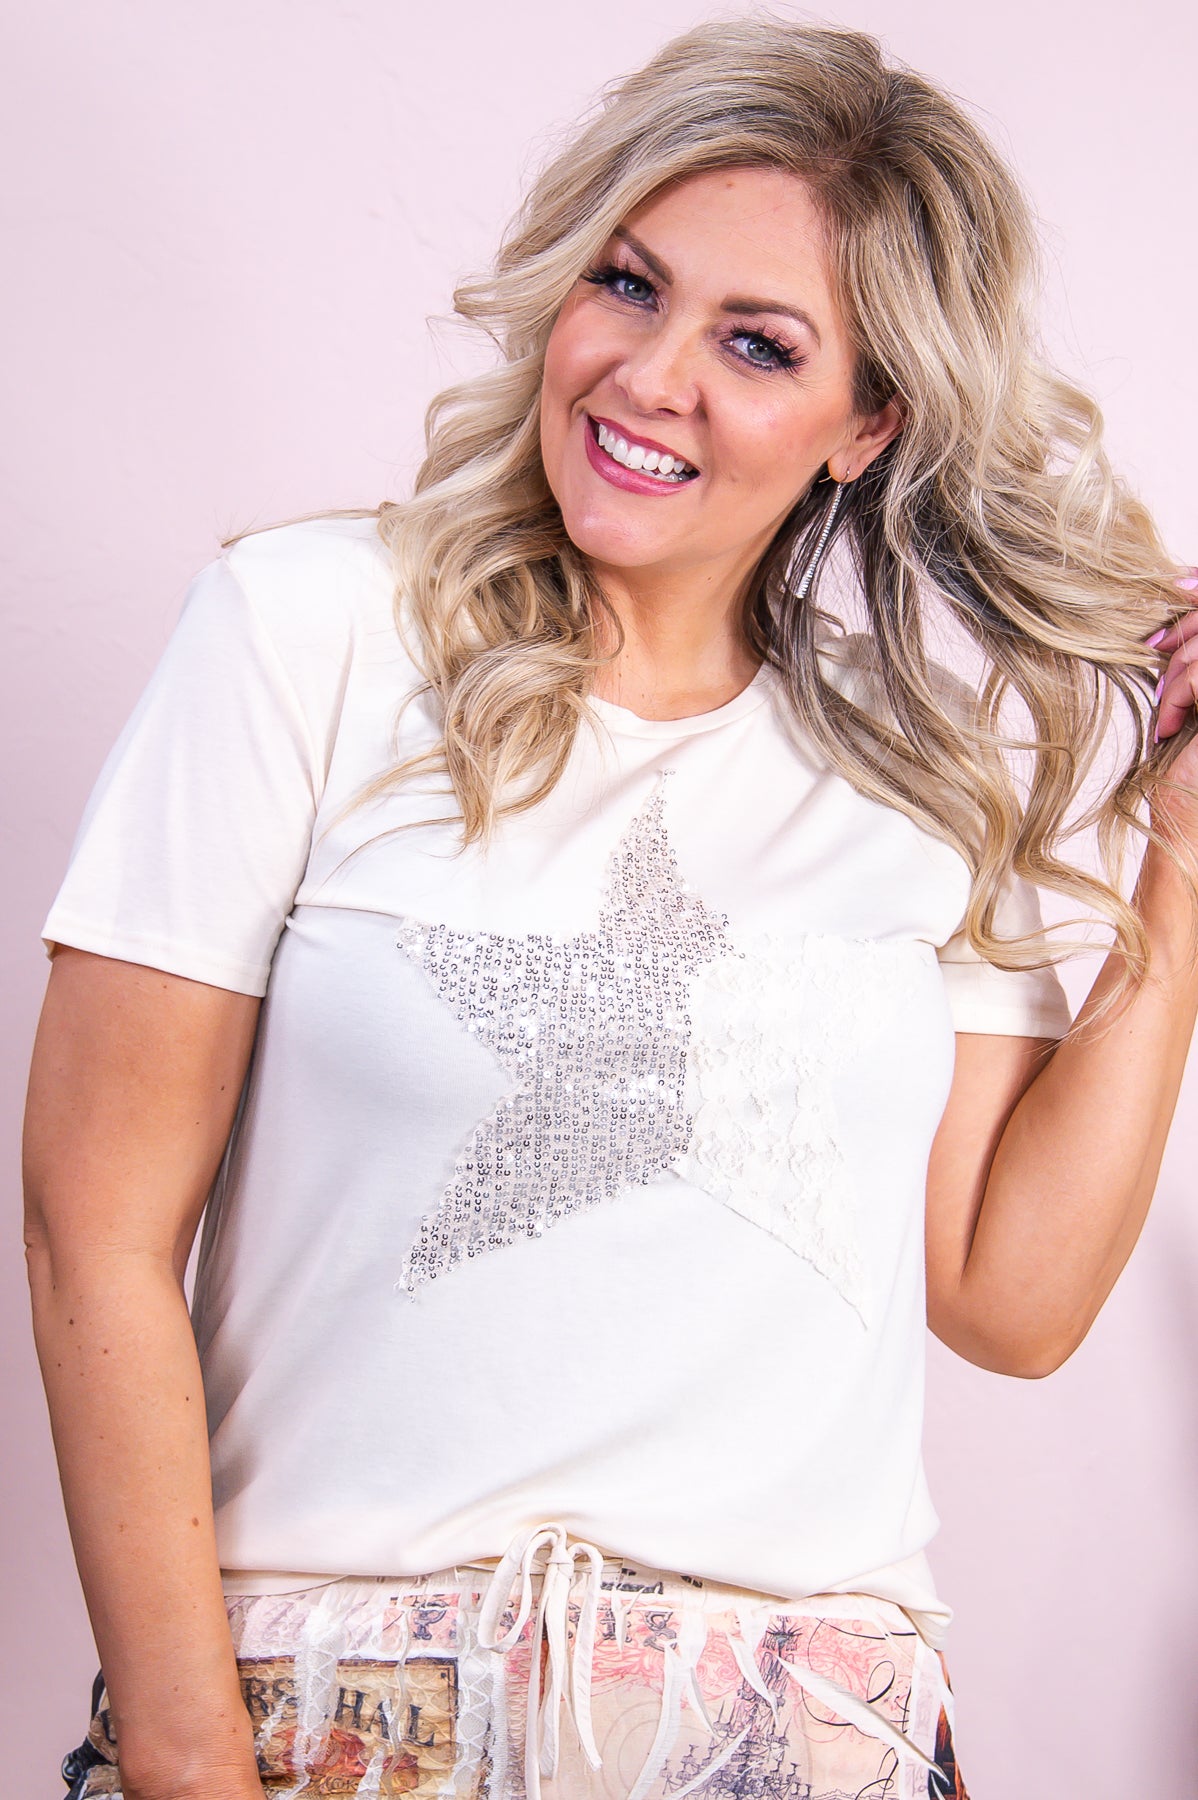 Stars In Your Eyes Beige Solid Floral Lace/Sequin Star Top - T9355BG